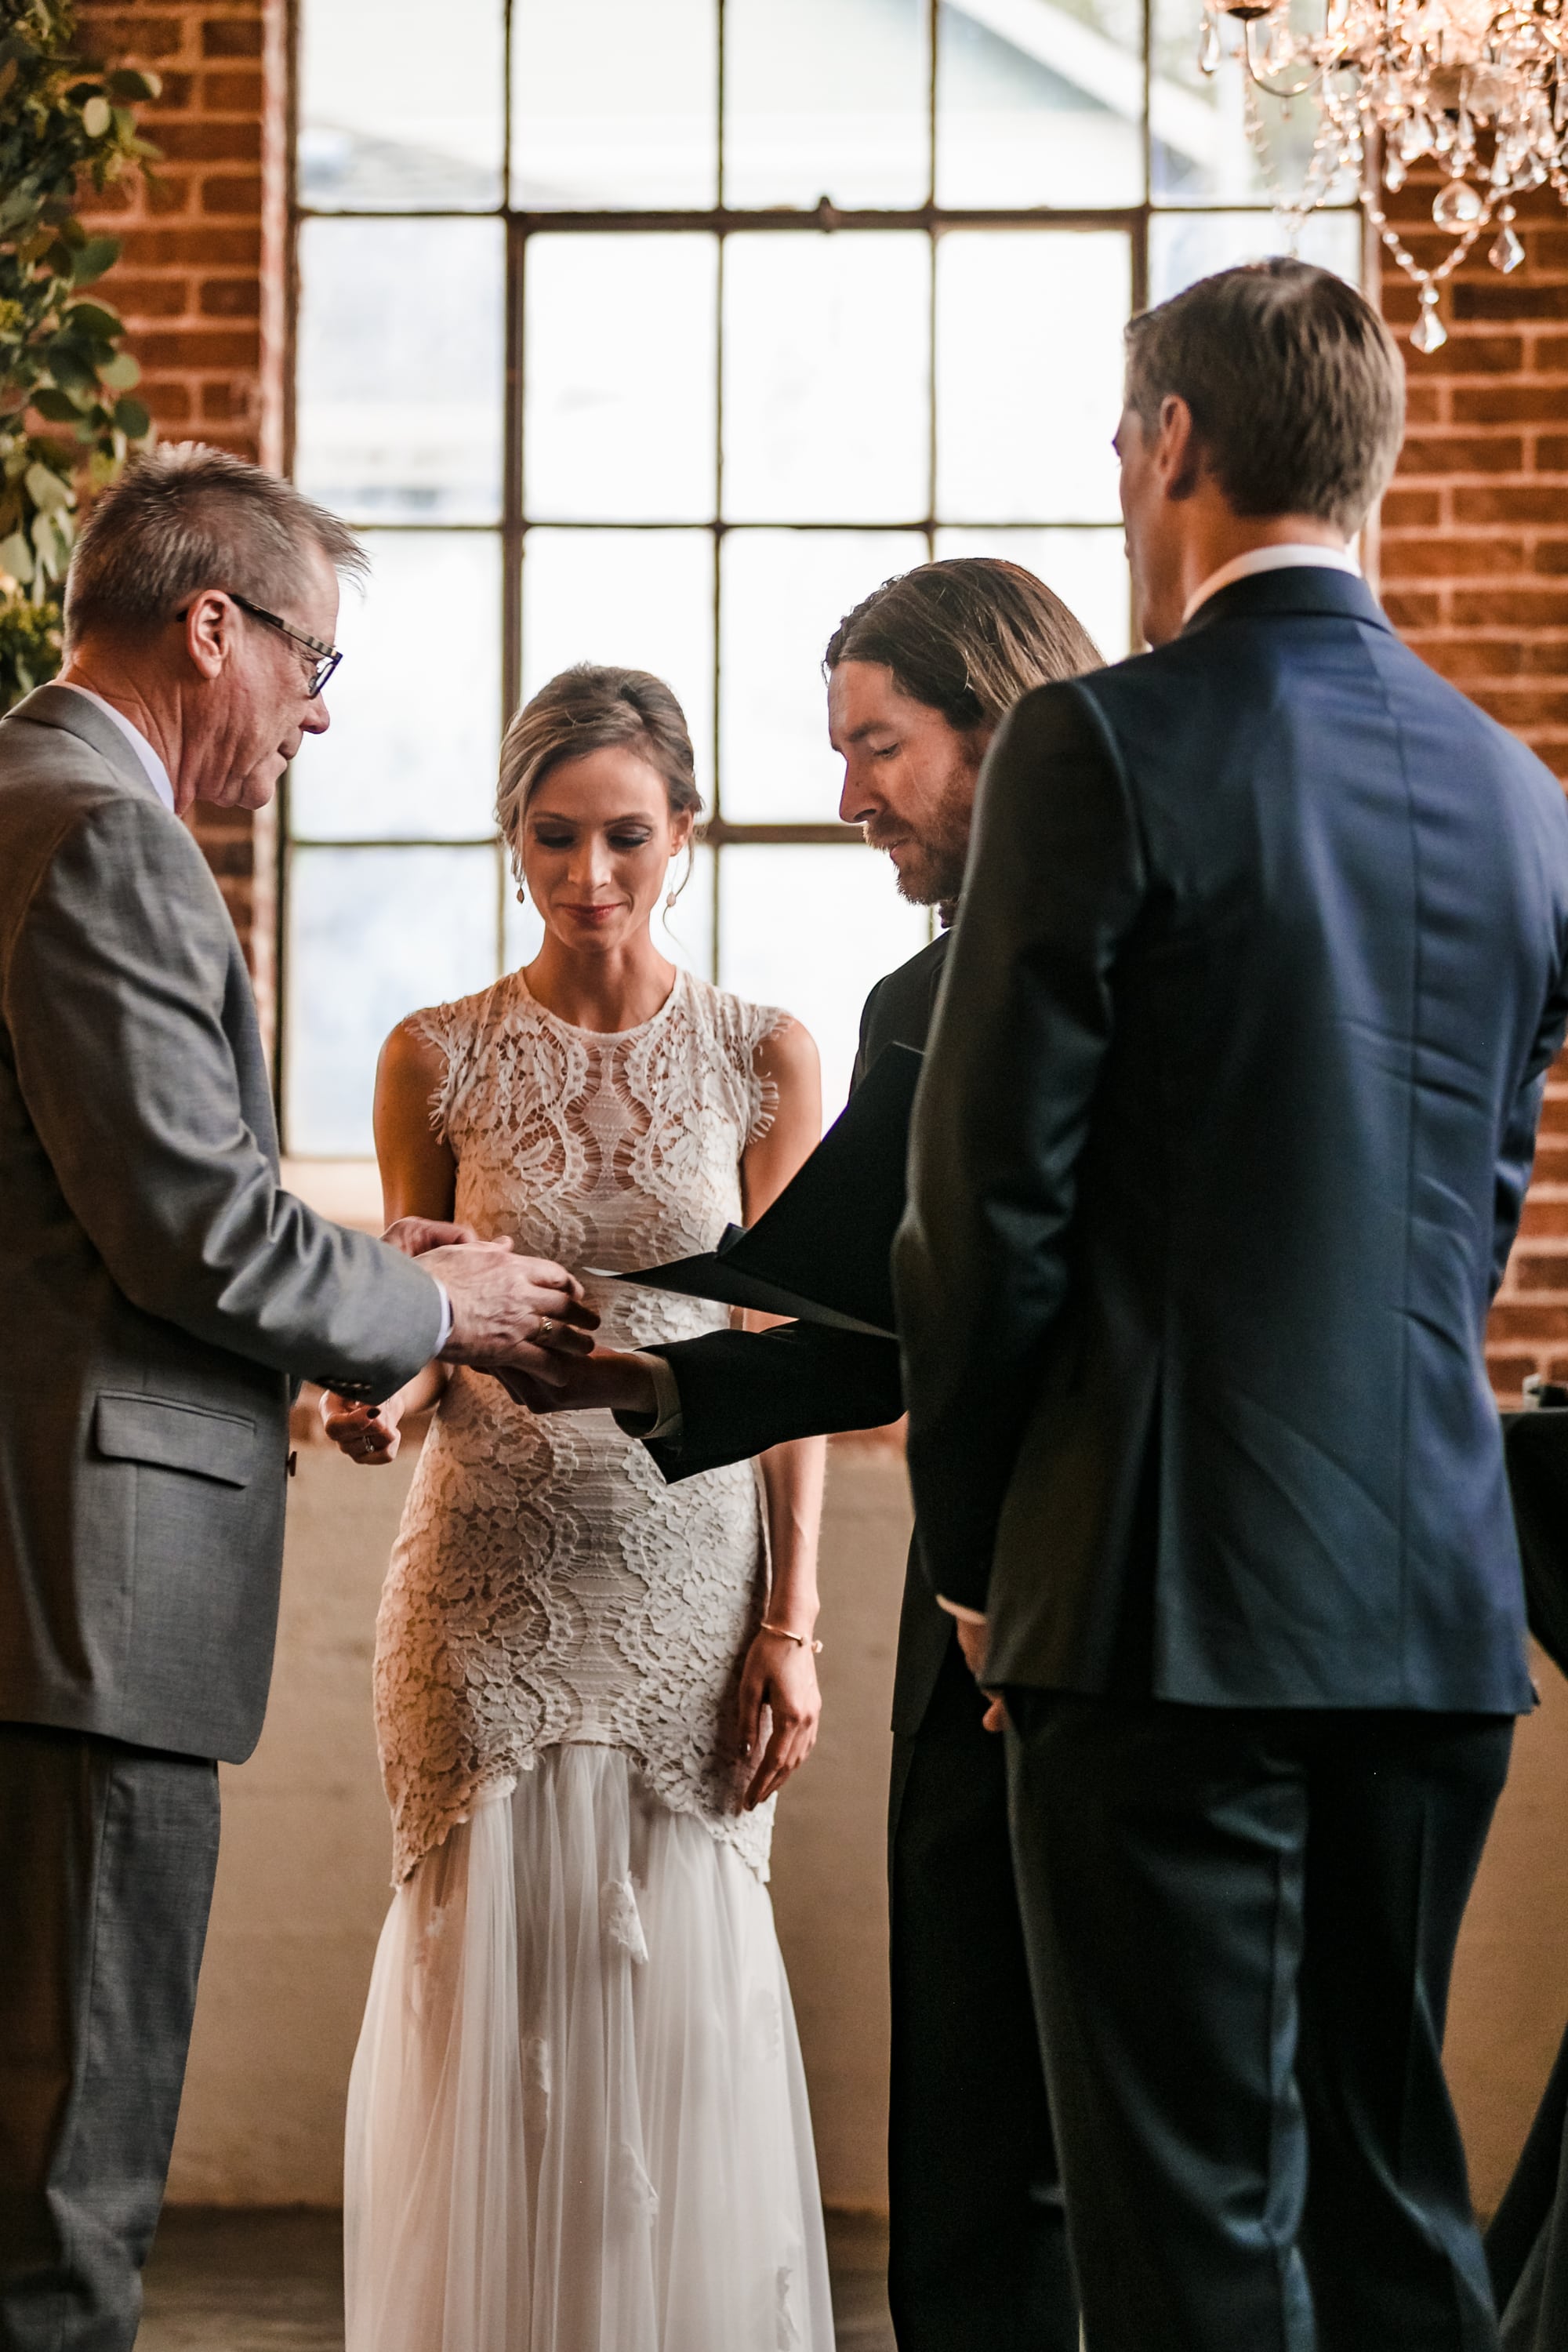 ring exchange, gathering the rings, dad giving the rings to officiant, dad holding rings, ceremony rings